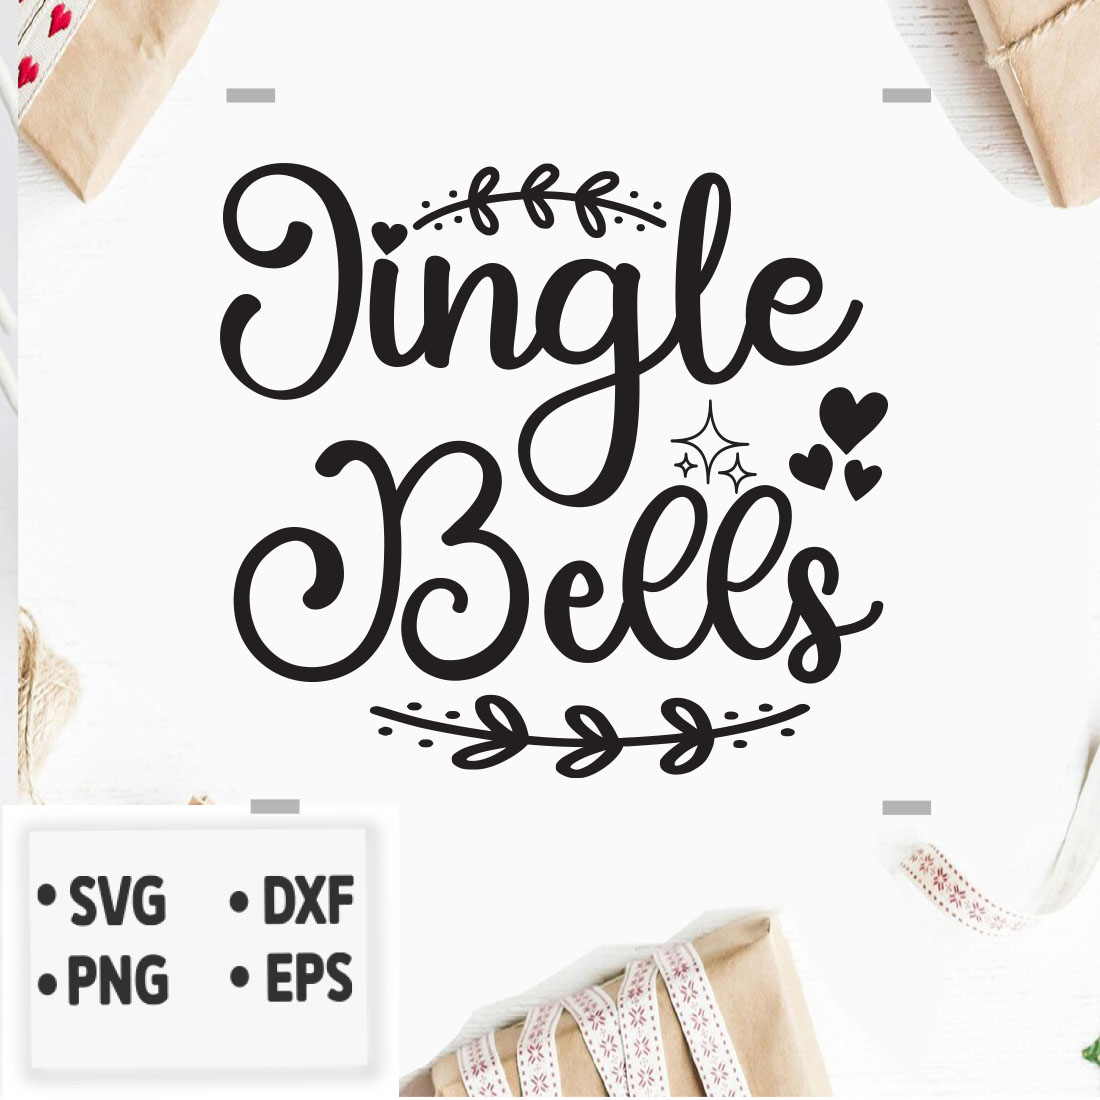 Image with colorful lettering Jingle bells.